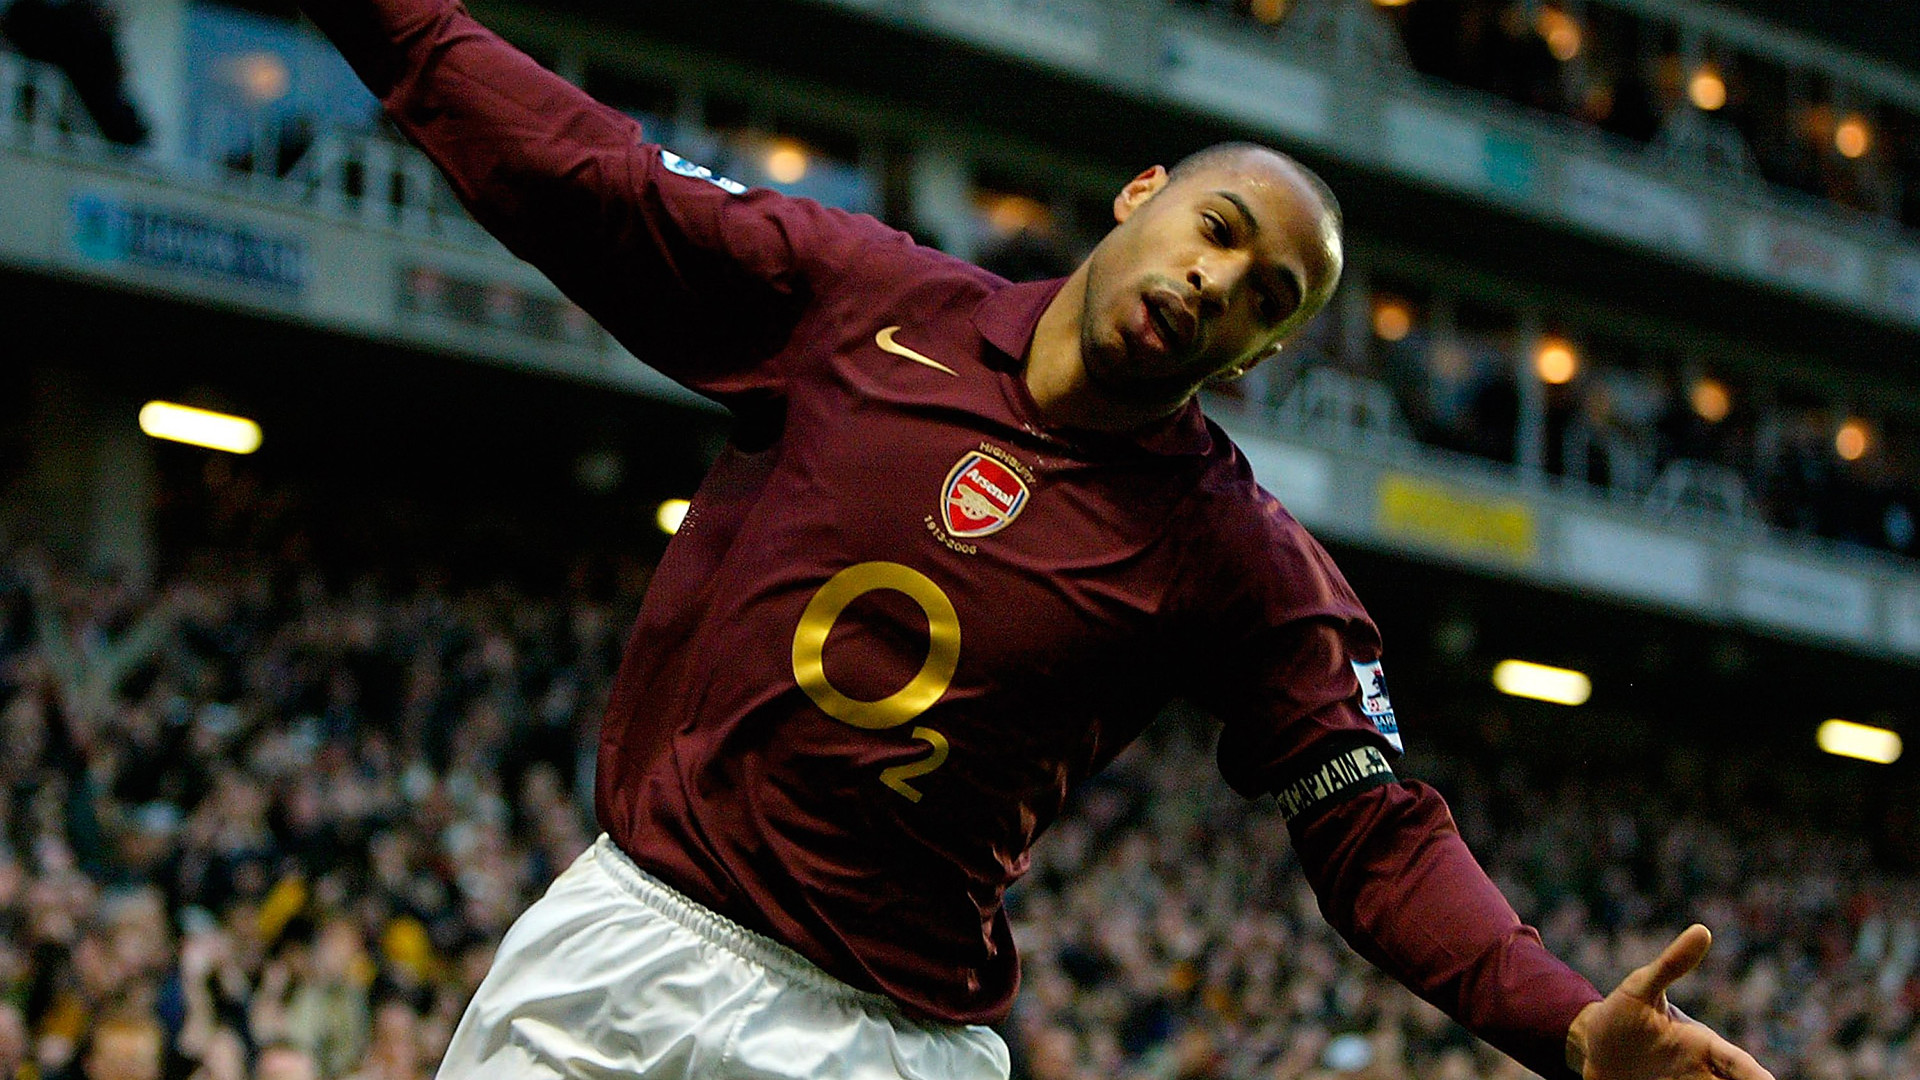 1920x1080 In the 2005/06 season Thierry Henry scored his 150th Barclays Premier  League goal for